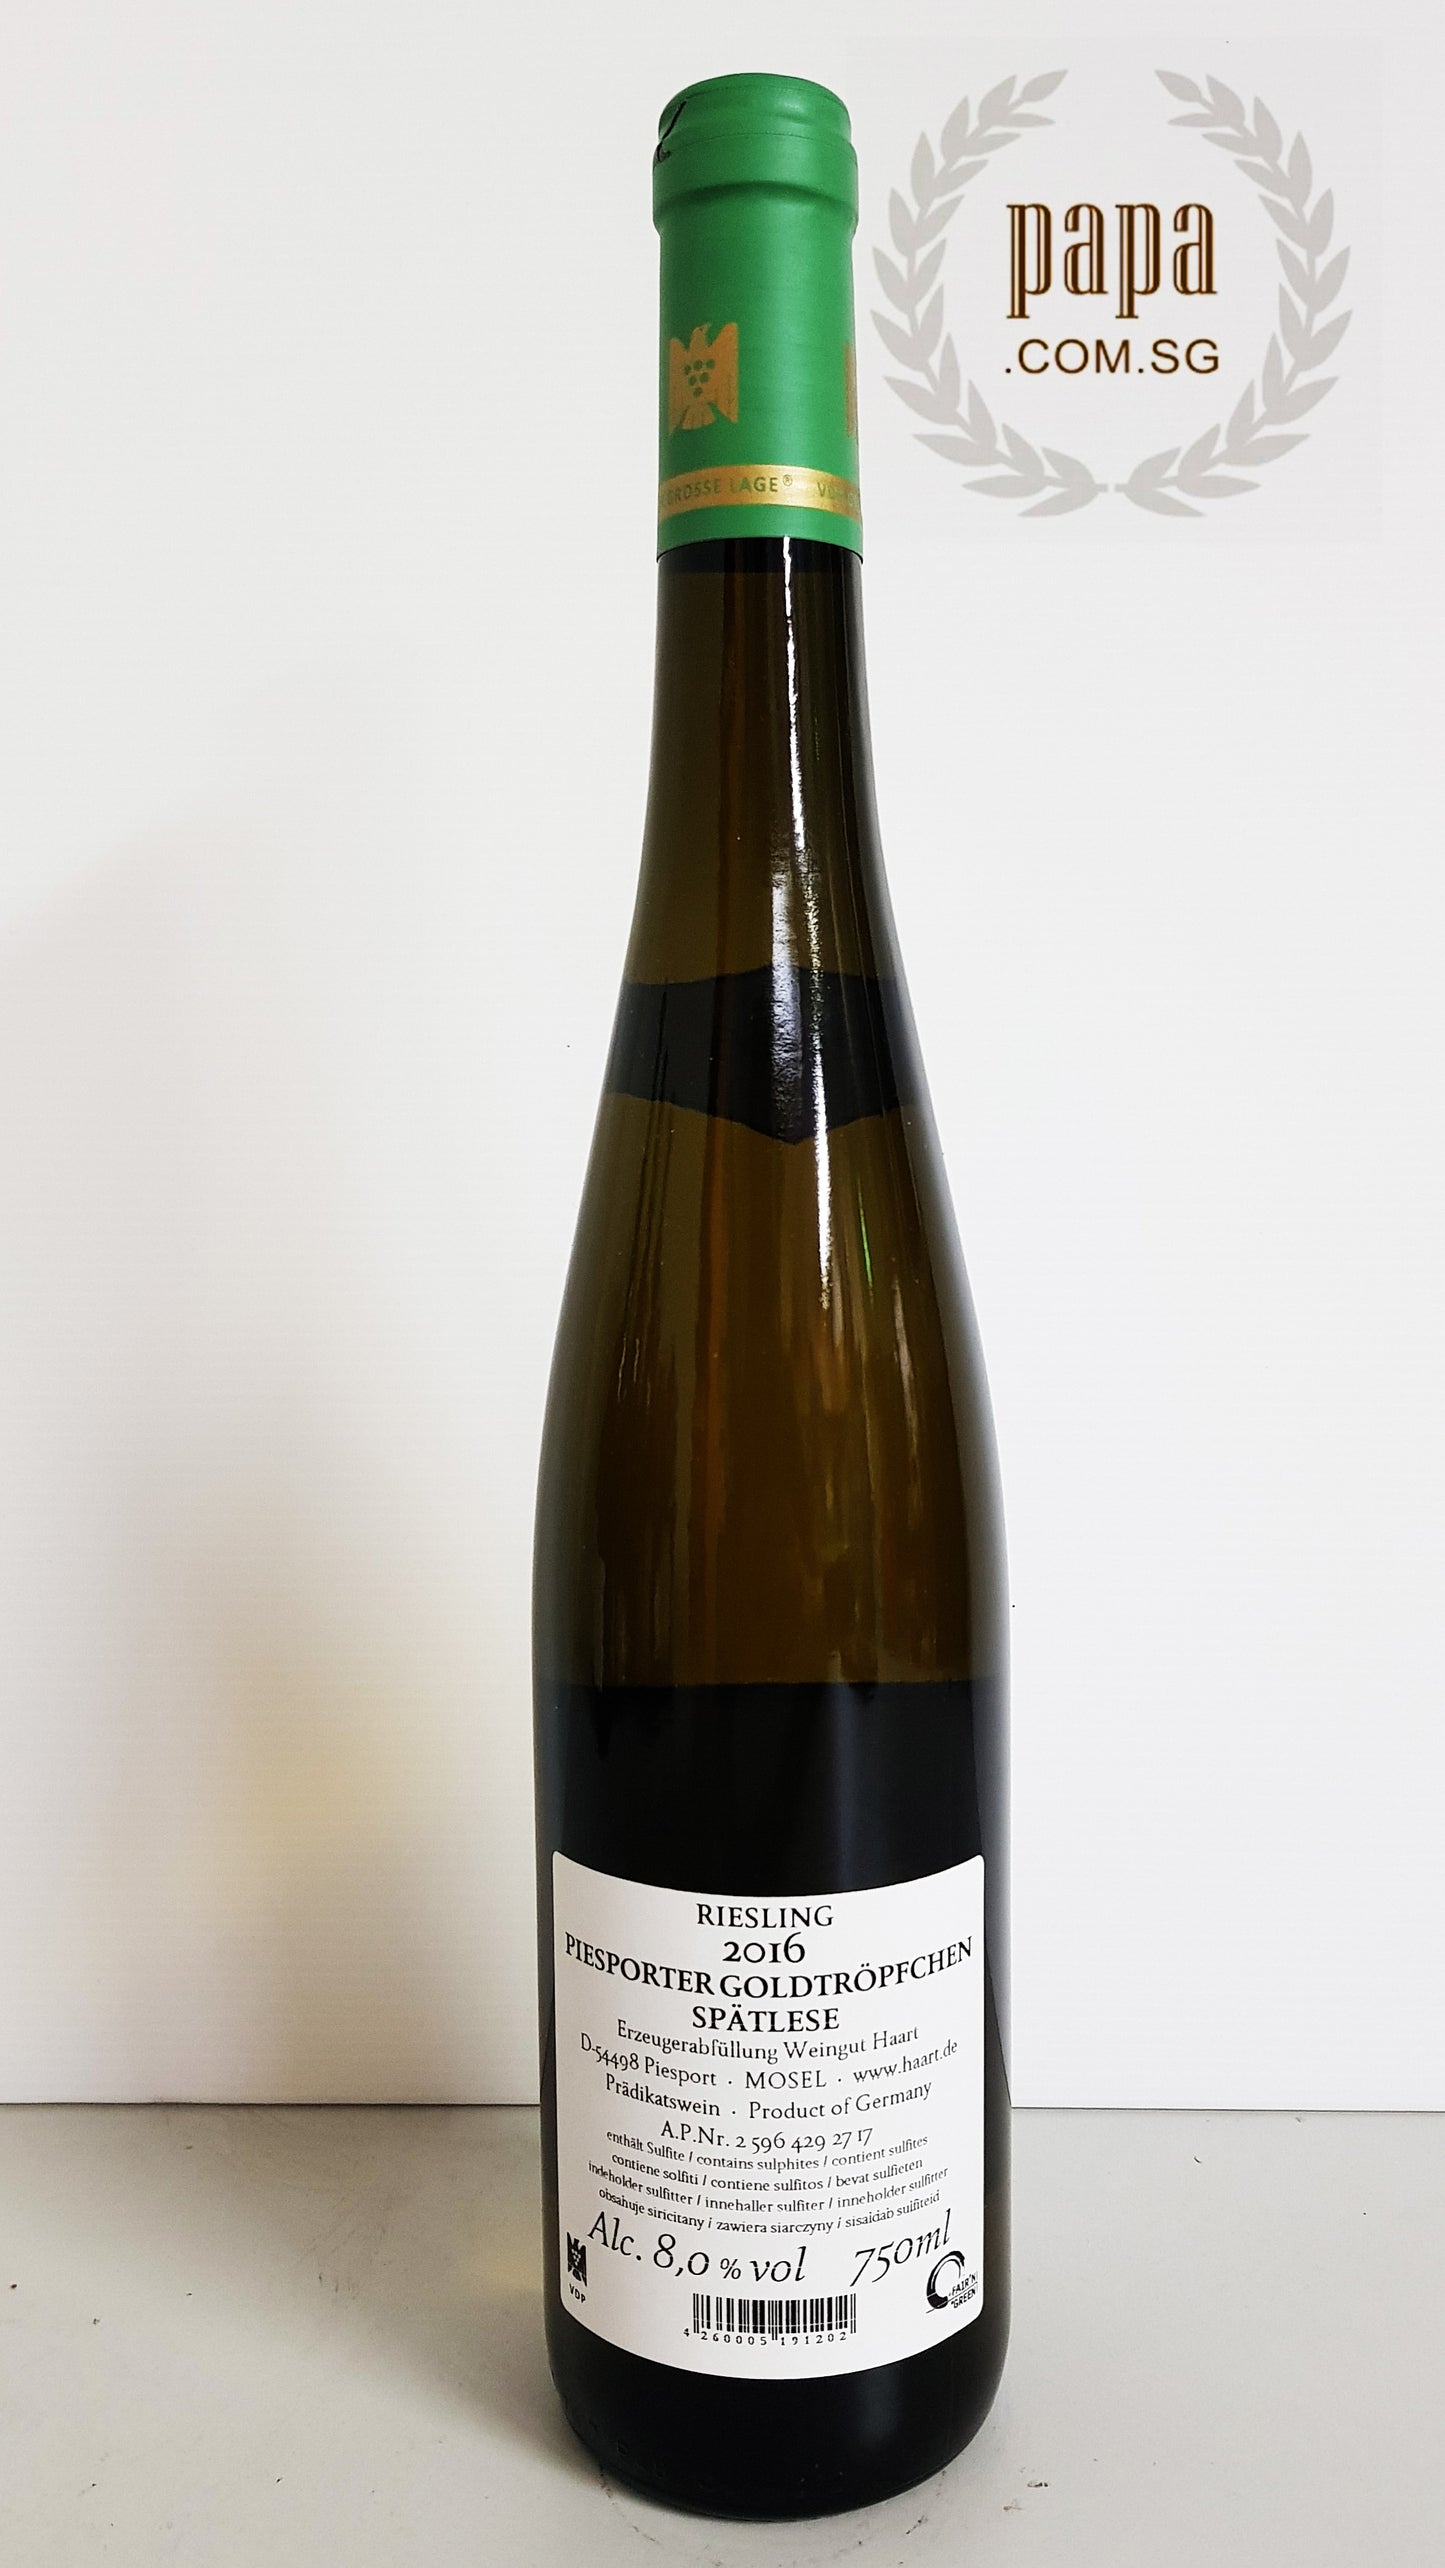 Haart - Goldtropfchen Riesling Spatlese 2016 (Sustainable Viticultural)